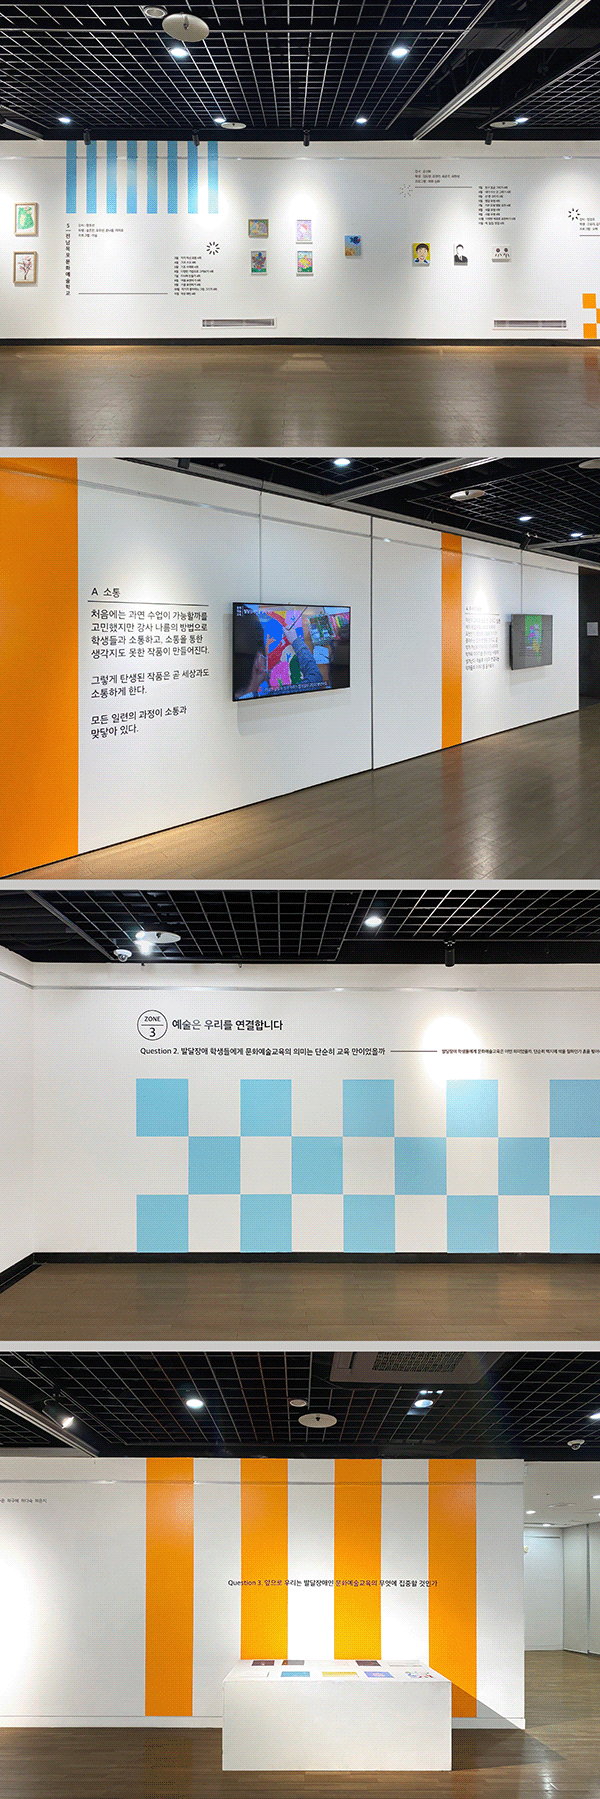 Exhibition Design of Art School for the Disabled